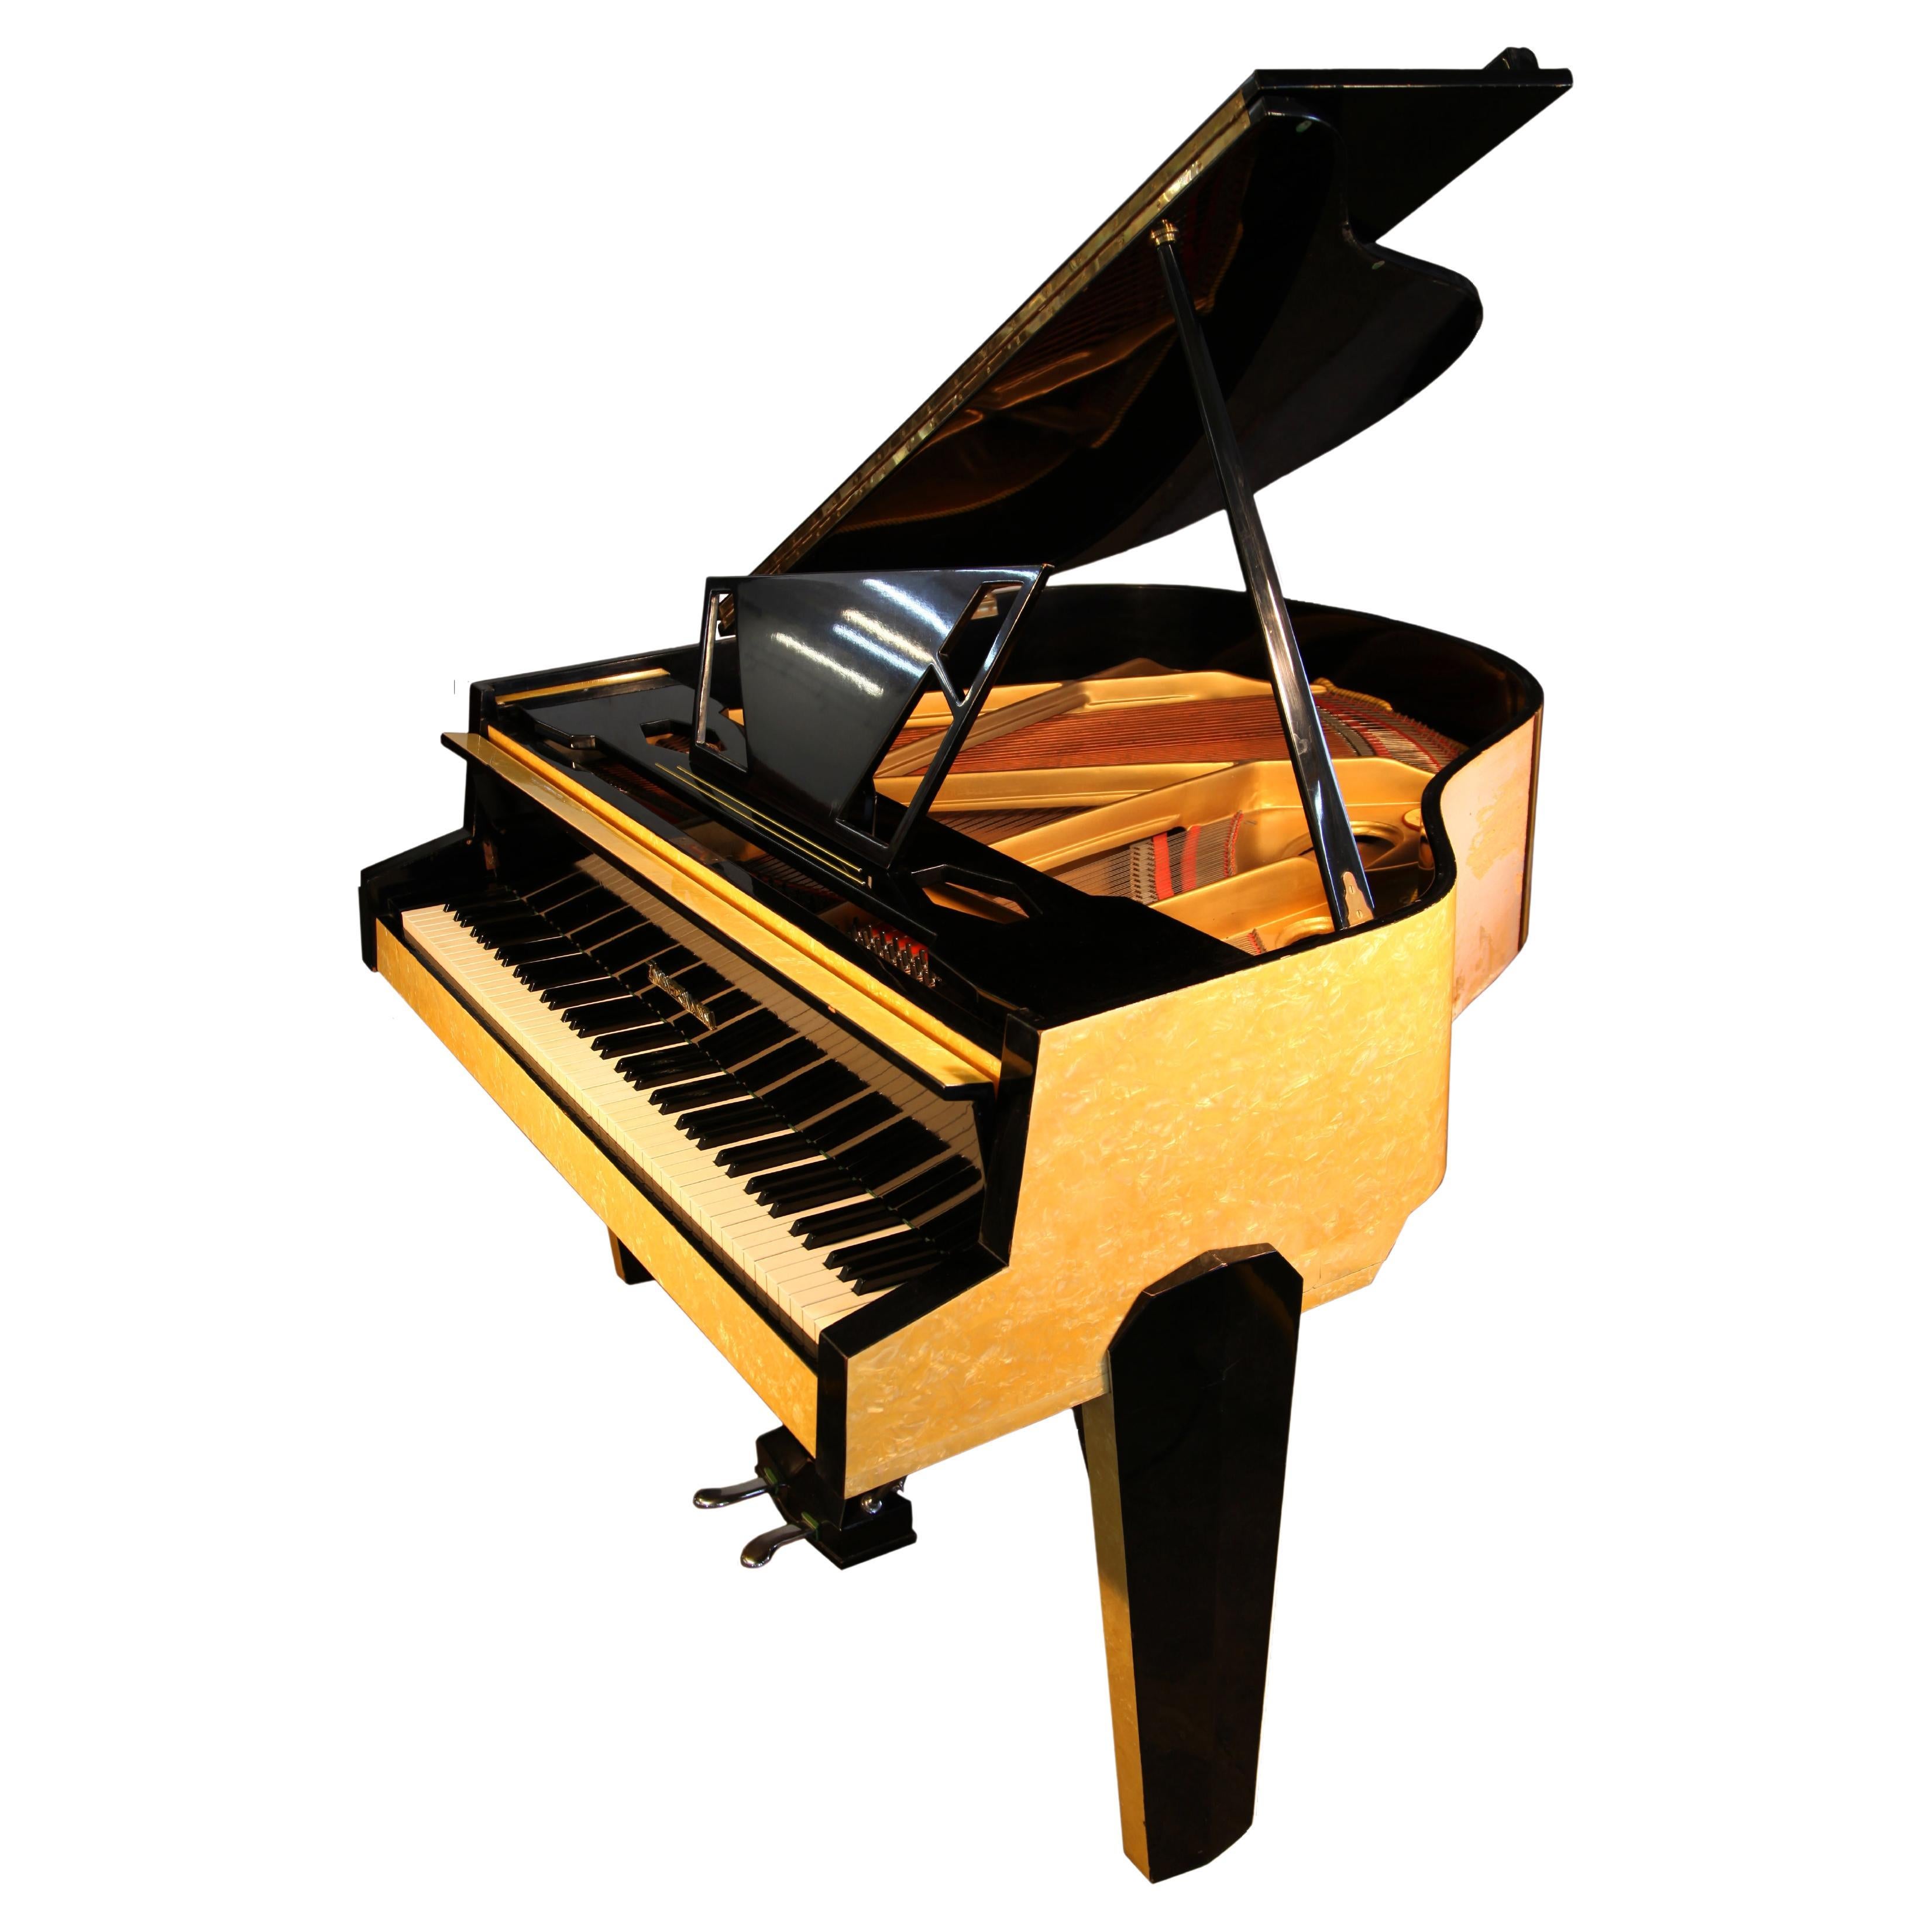 Style Zimmermann Baby Piano Yellow Formica Tubular Steel Piano For Sale at